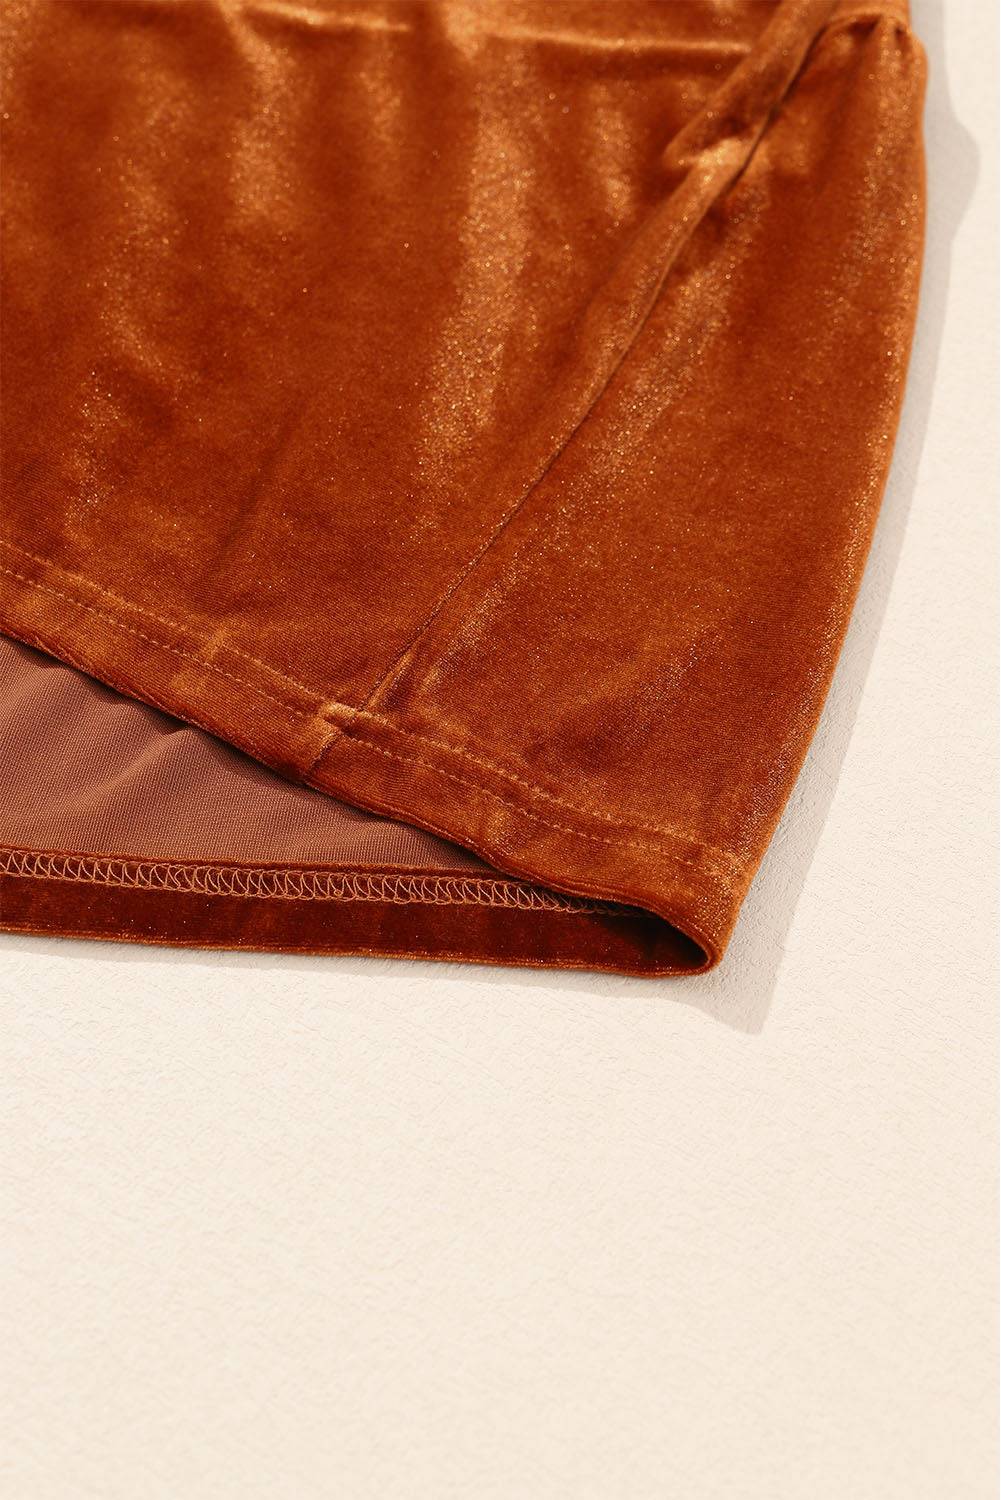 a pair of brown pants laying on top of a white surface